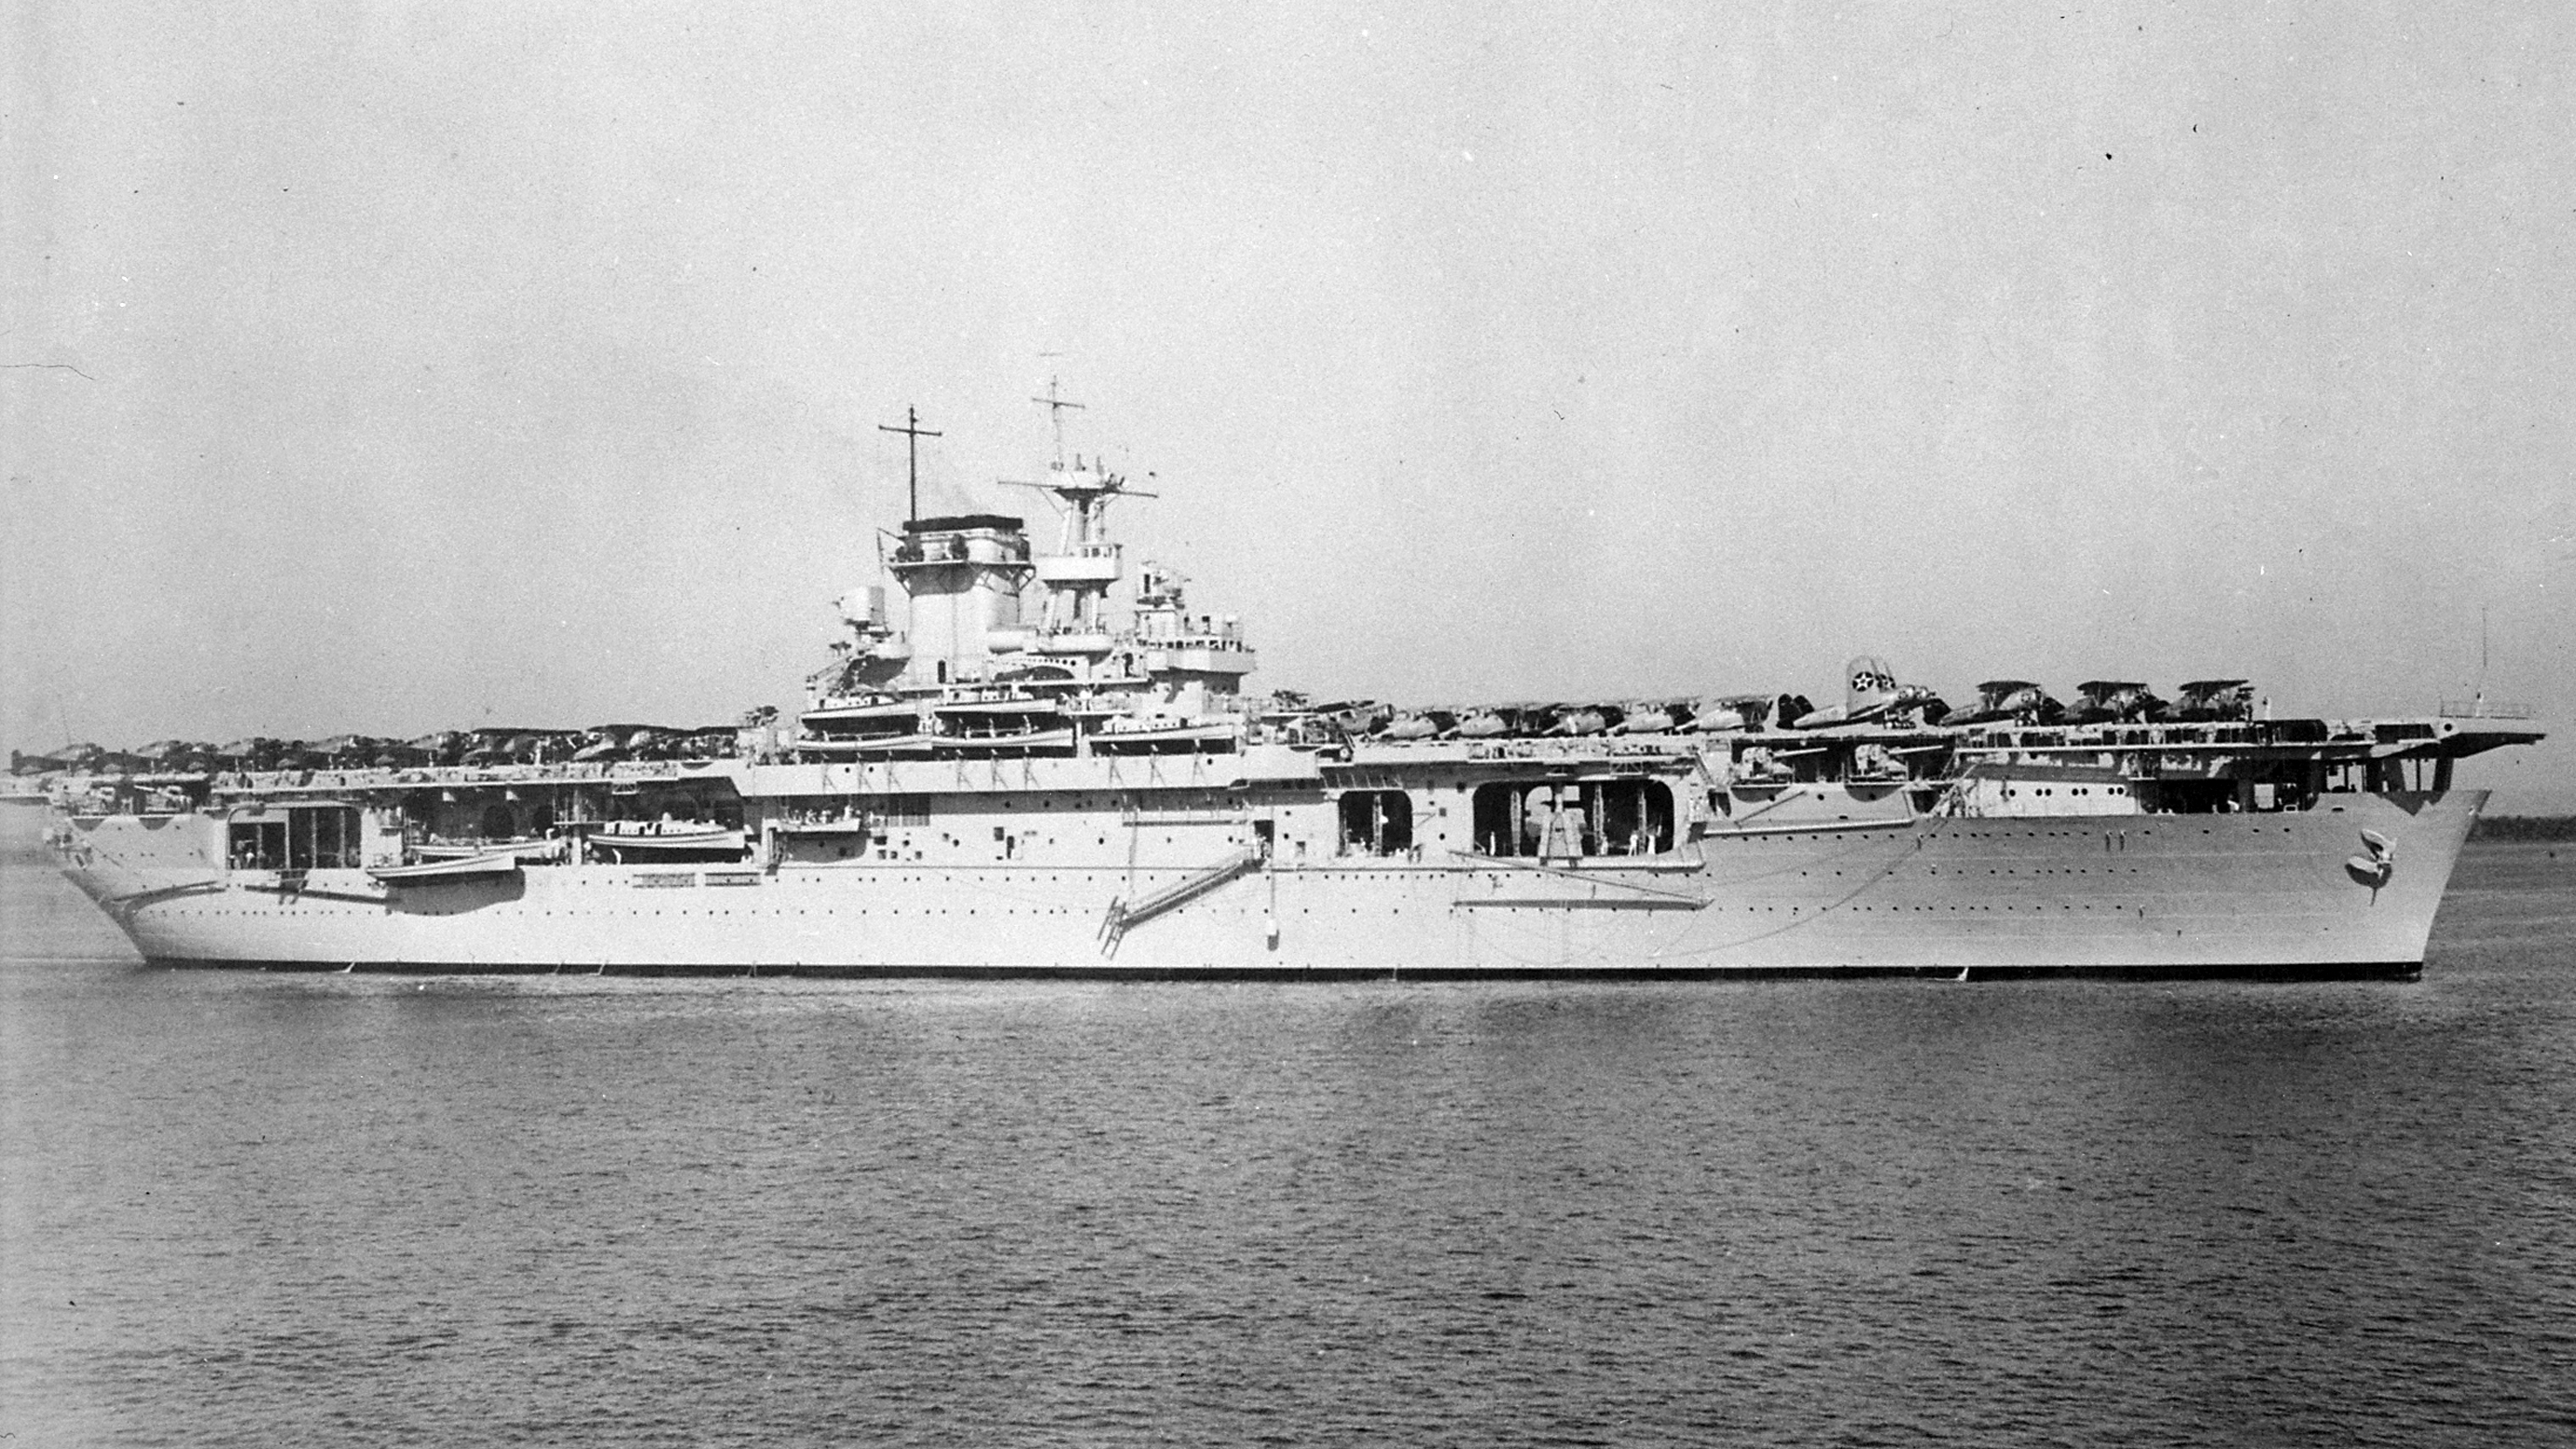 Broadside view of USS Wasp (Wasp-class) at anchor on 27 Dec 1940, probably in Guantanamo Bay, Cuba. Note F3F fighters and SB2U Vindicator aircraft on the flight deck.